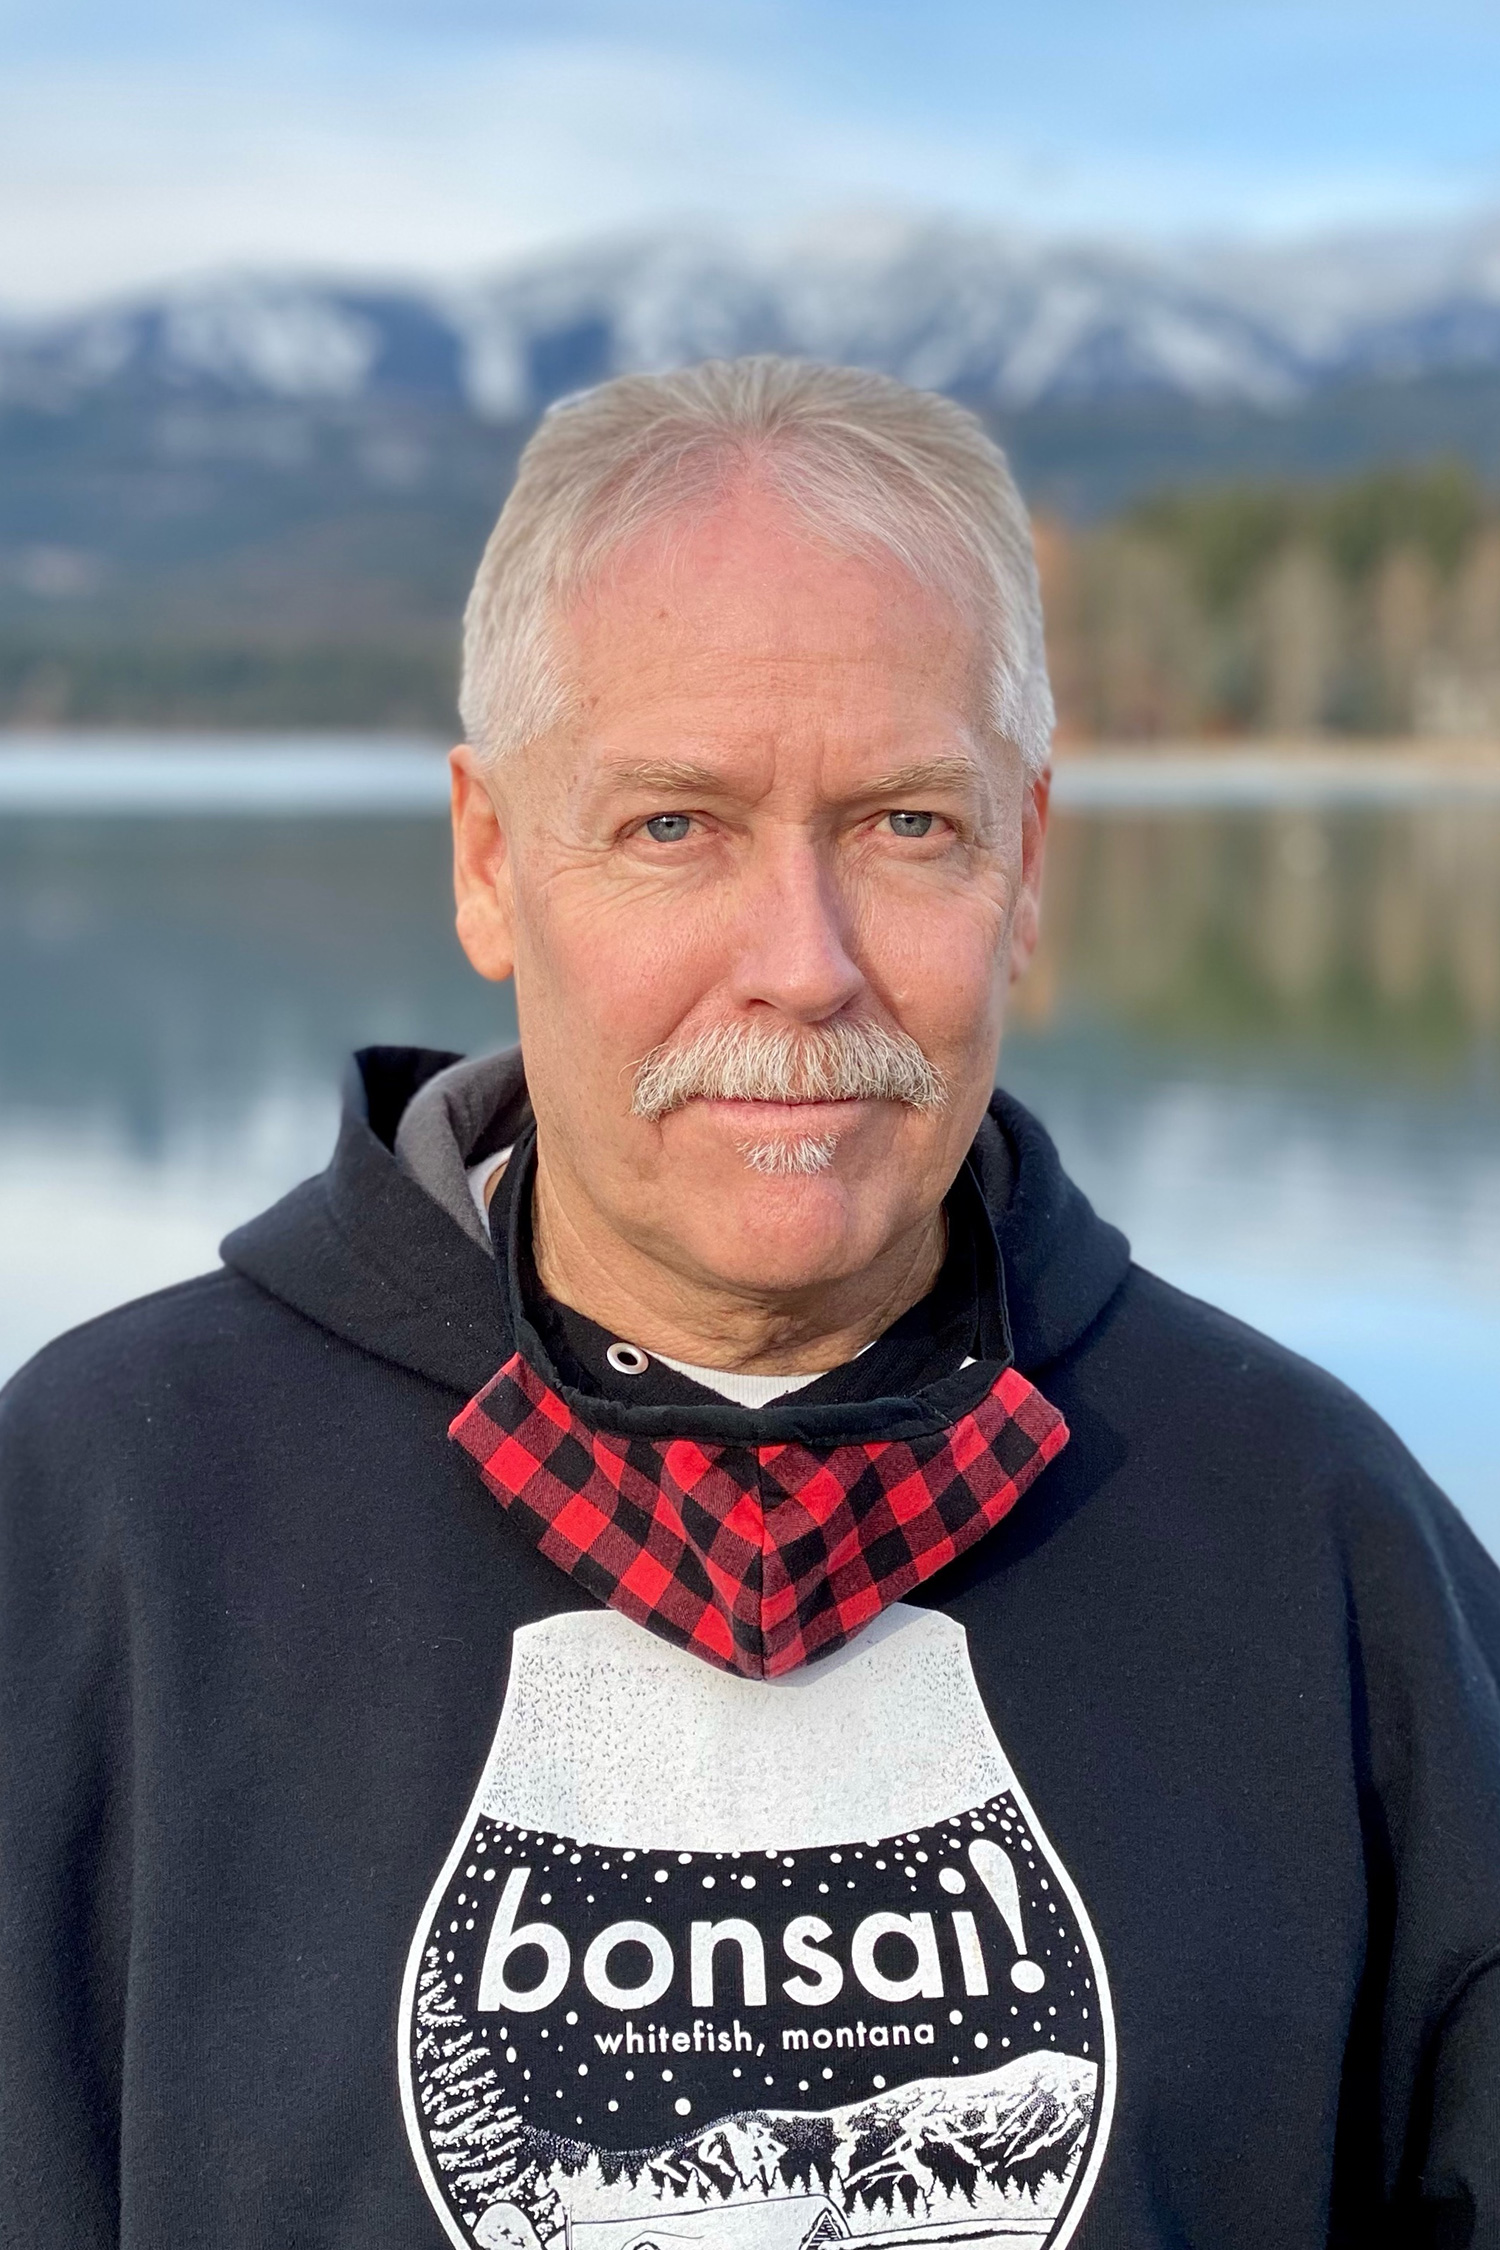 A white man with white hair stands in front of a mountain lake wearing a black hooded sweatshirt.